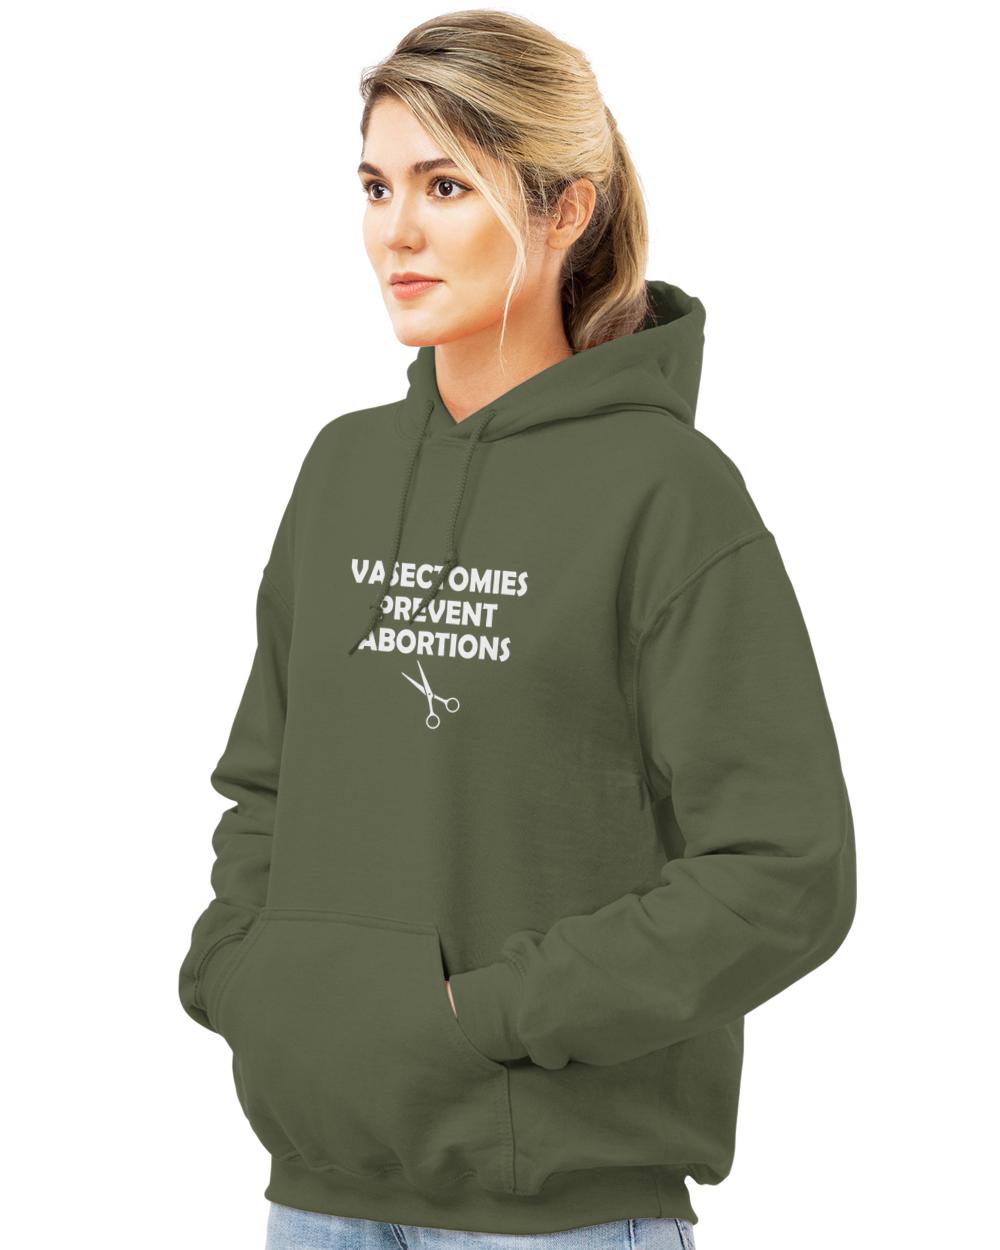 Vasectomies Prevent Abortion Feminist Women Right ProChoice T-Shirt